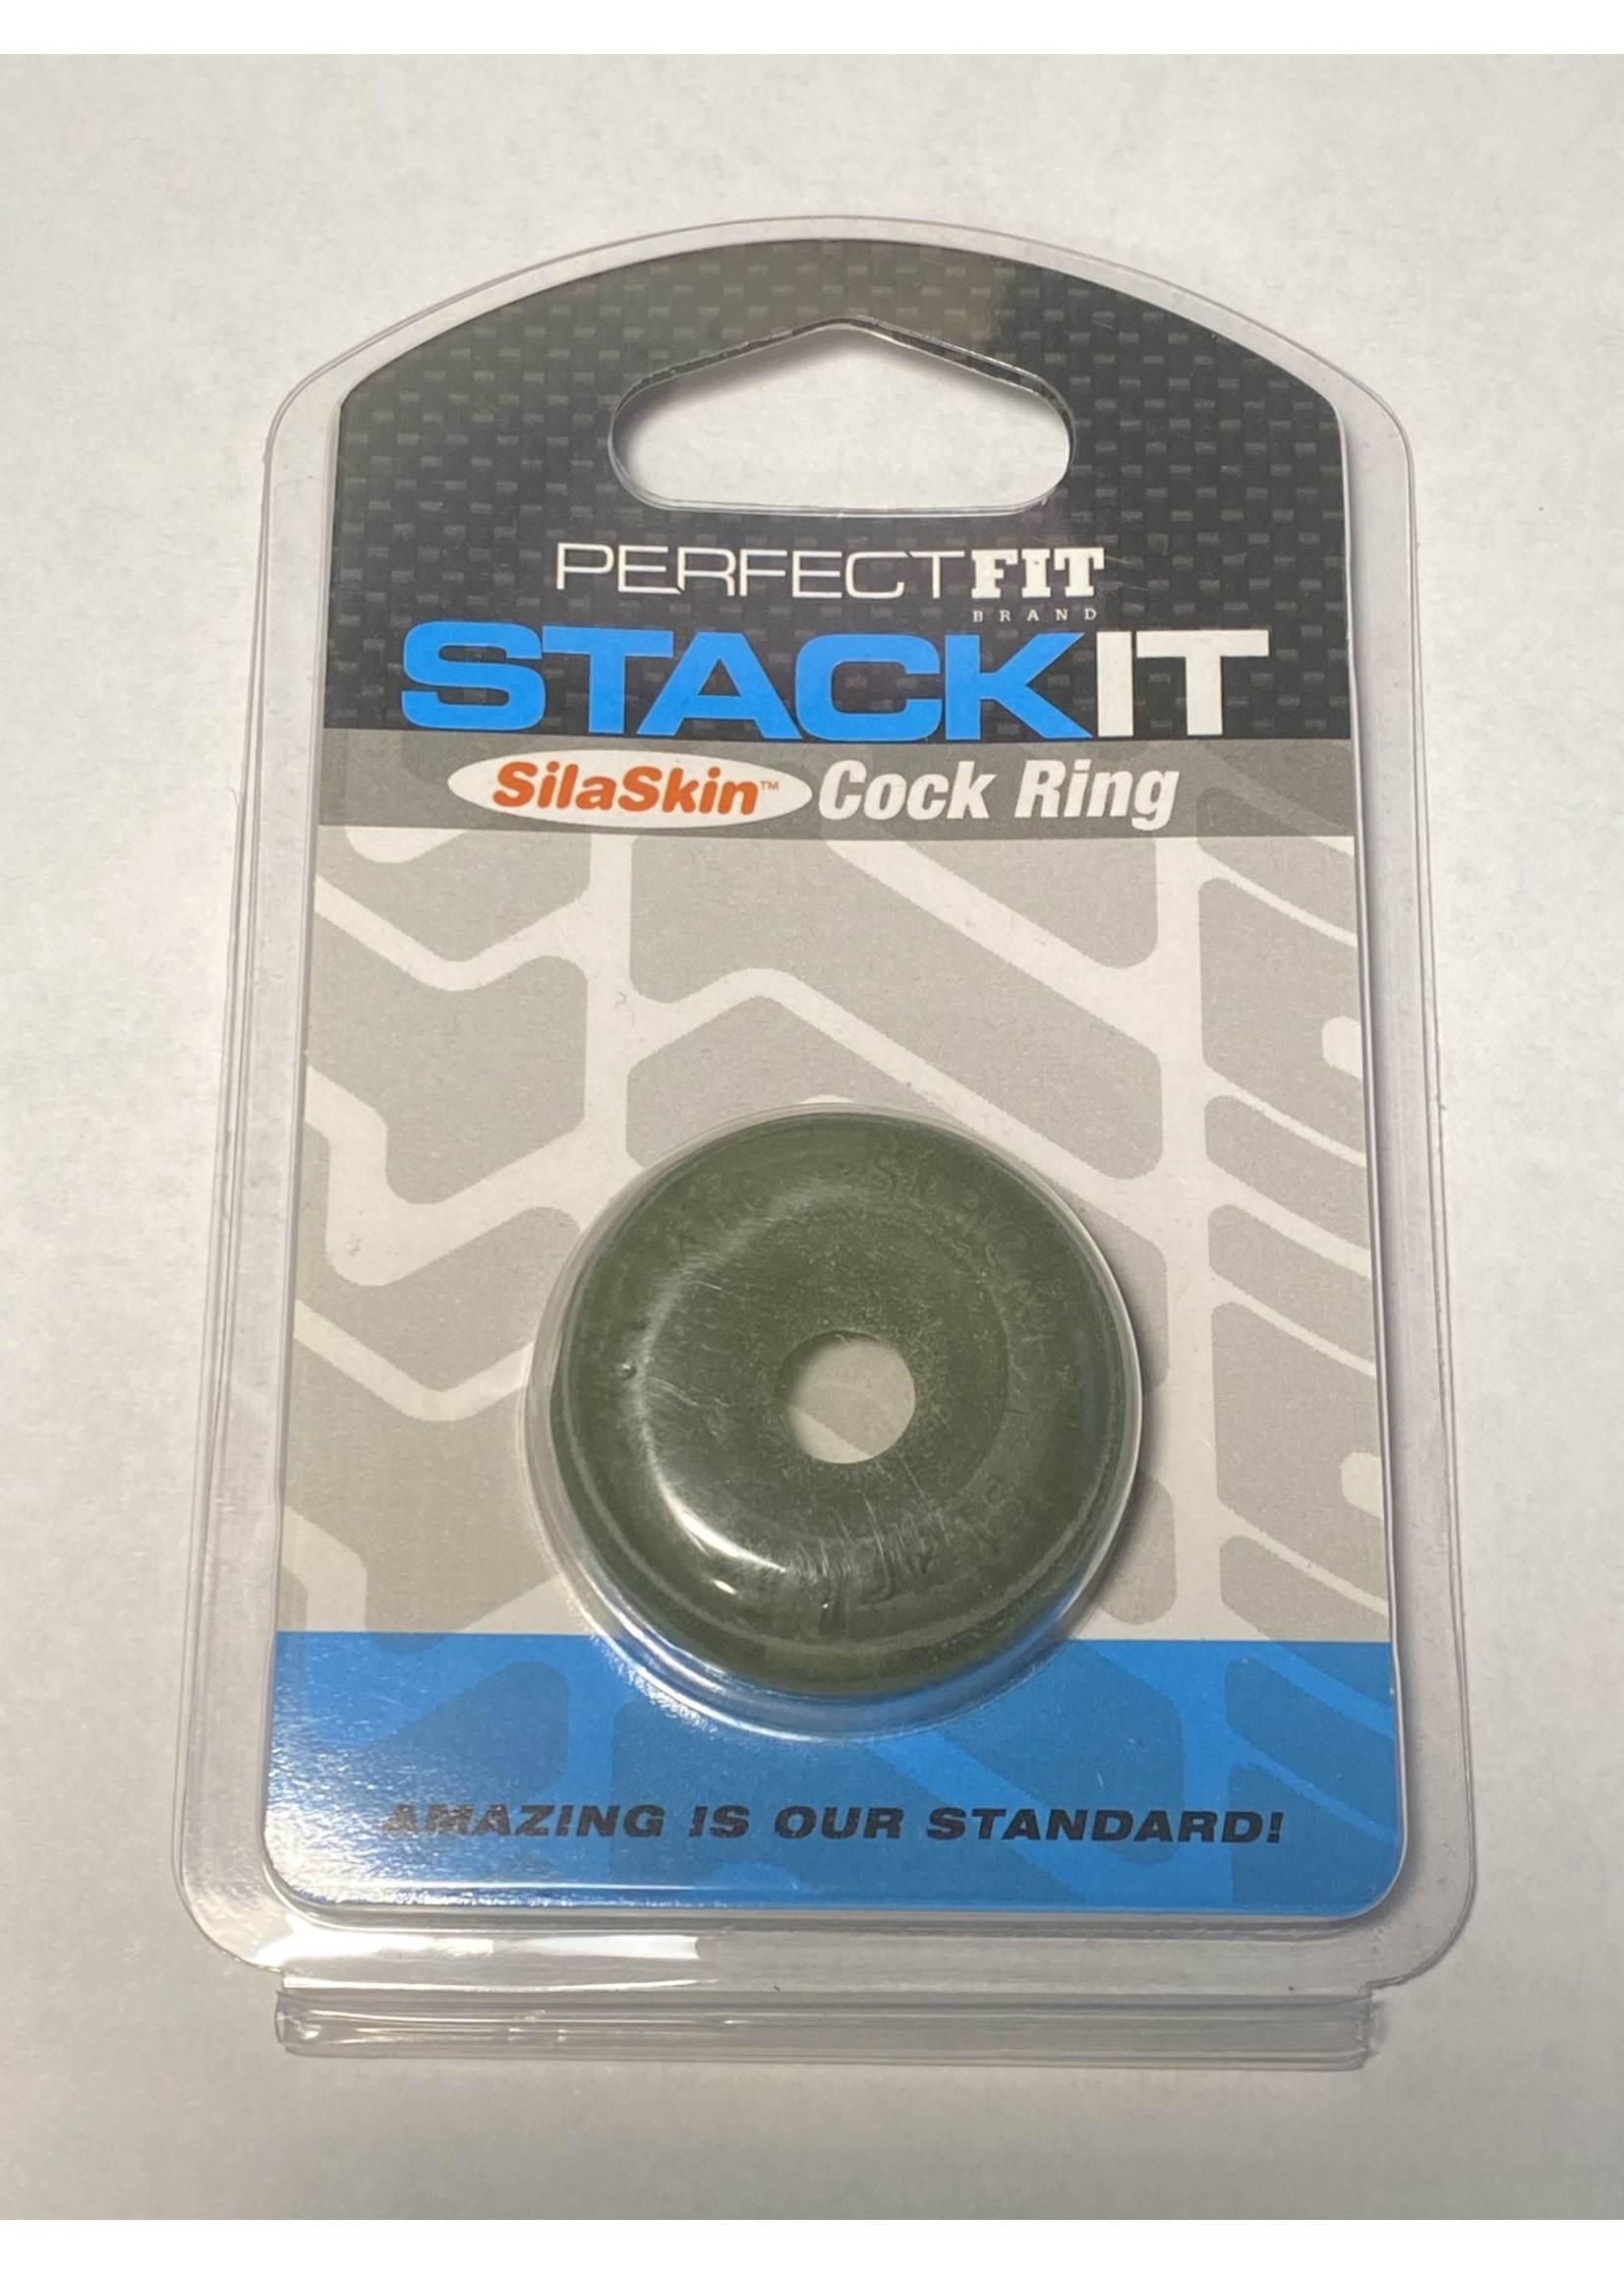 PerfectFit Perfect Fit Stackit Silaskin